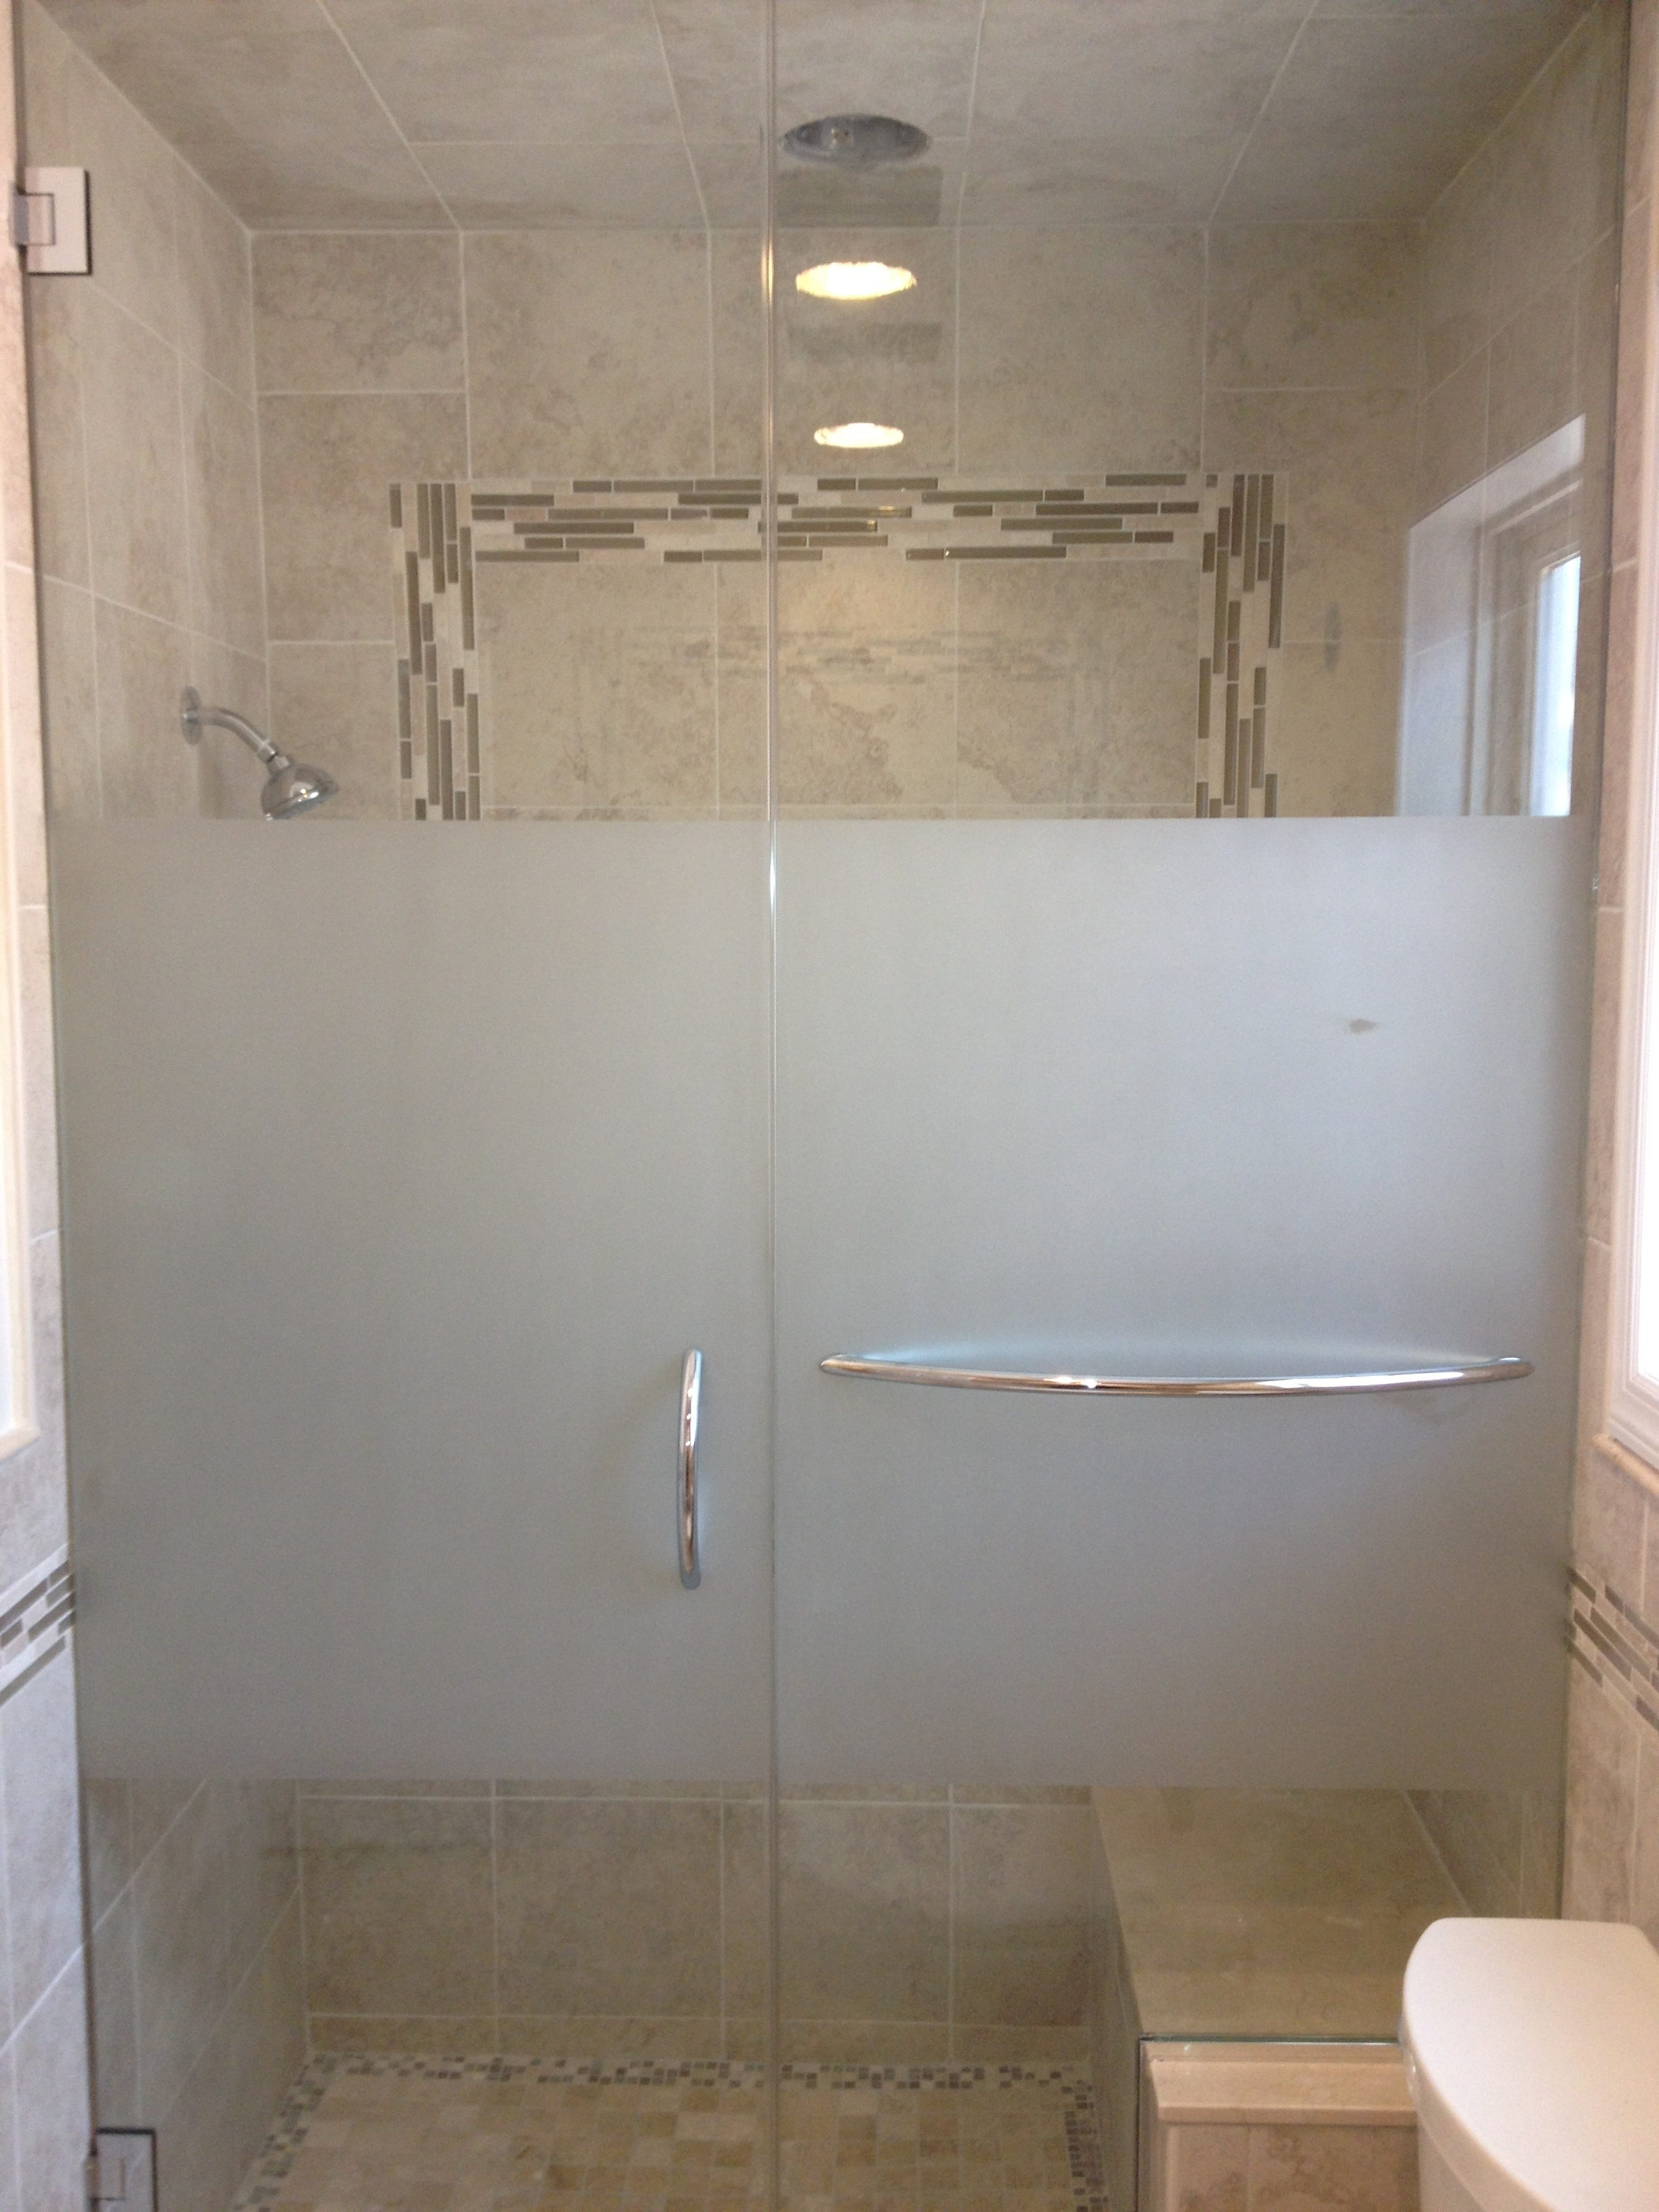 Privacy Film For Glass Shower Doors Doors Ideas Rain Glass Shower pertaining to dimensions 2448 X 3264